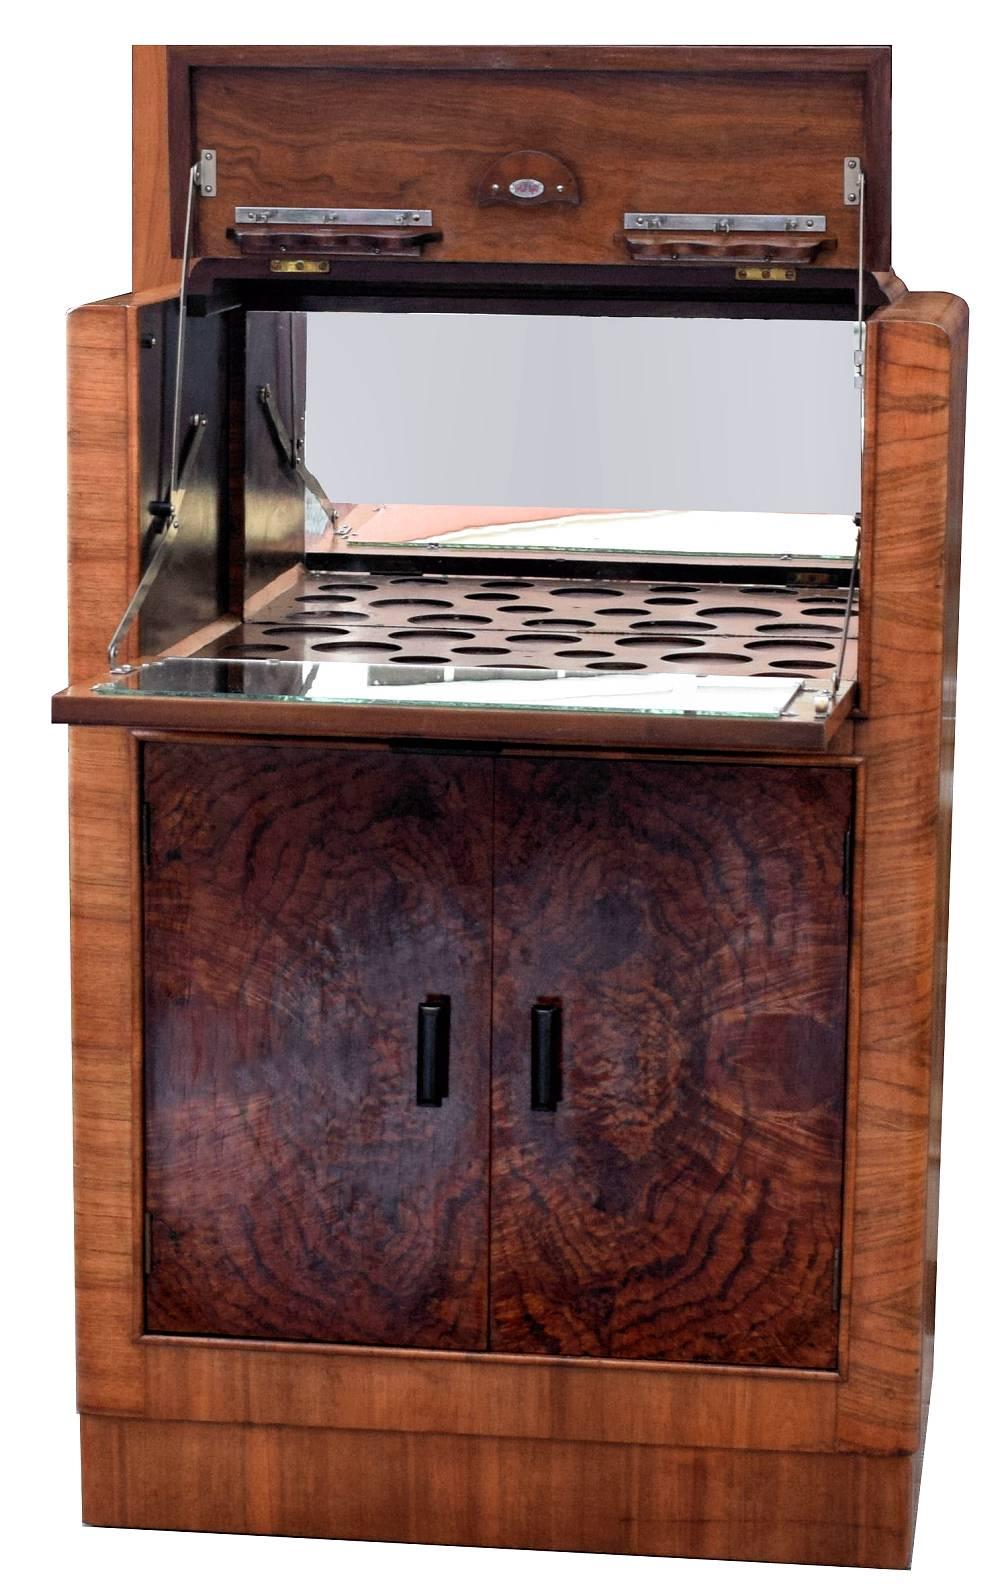 For your consideration is this stylish English Art Deco, 1930s figured walnut cocktail cabinet. This is a great looking period piece with exceptionally attractive walnut veneers. The drop down section at the top reveals a full mirrored interior with